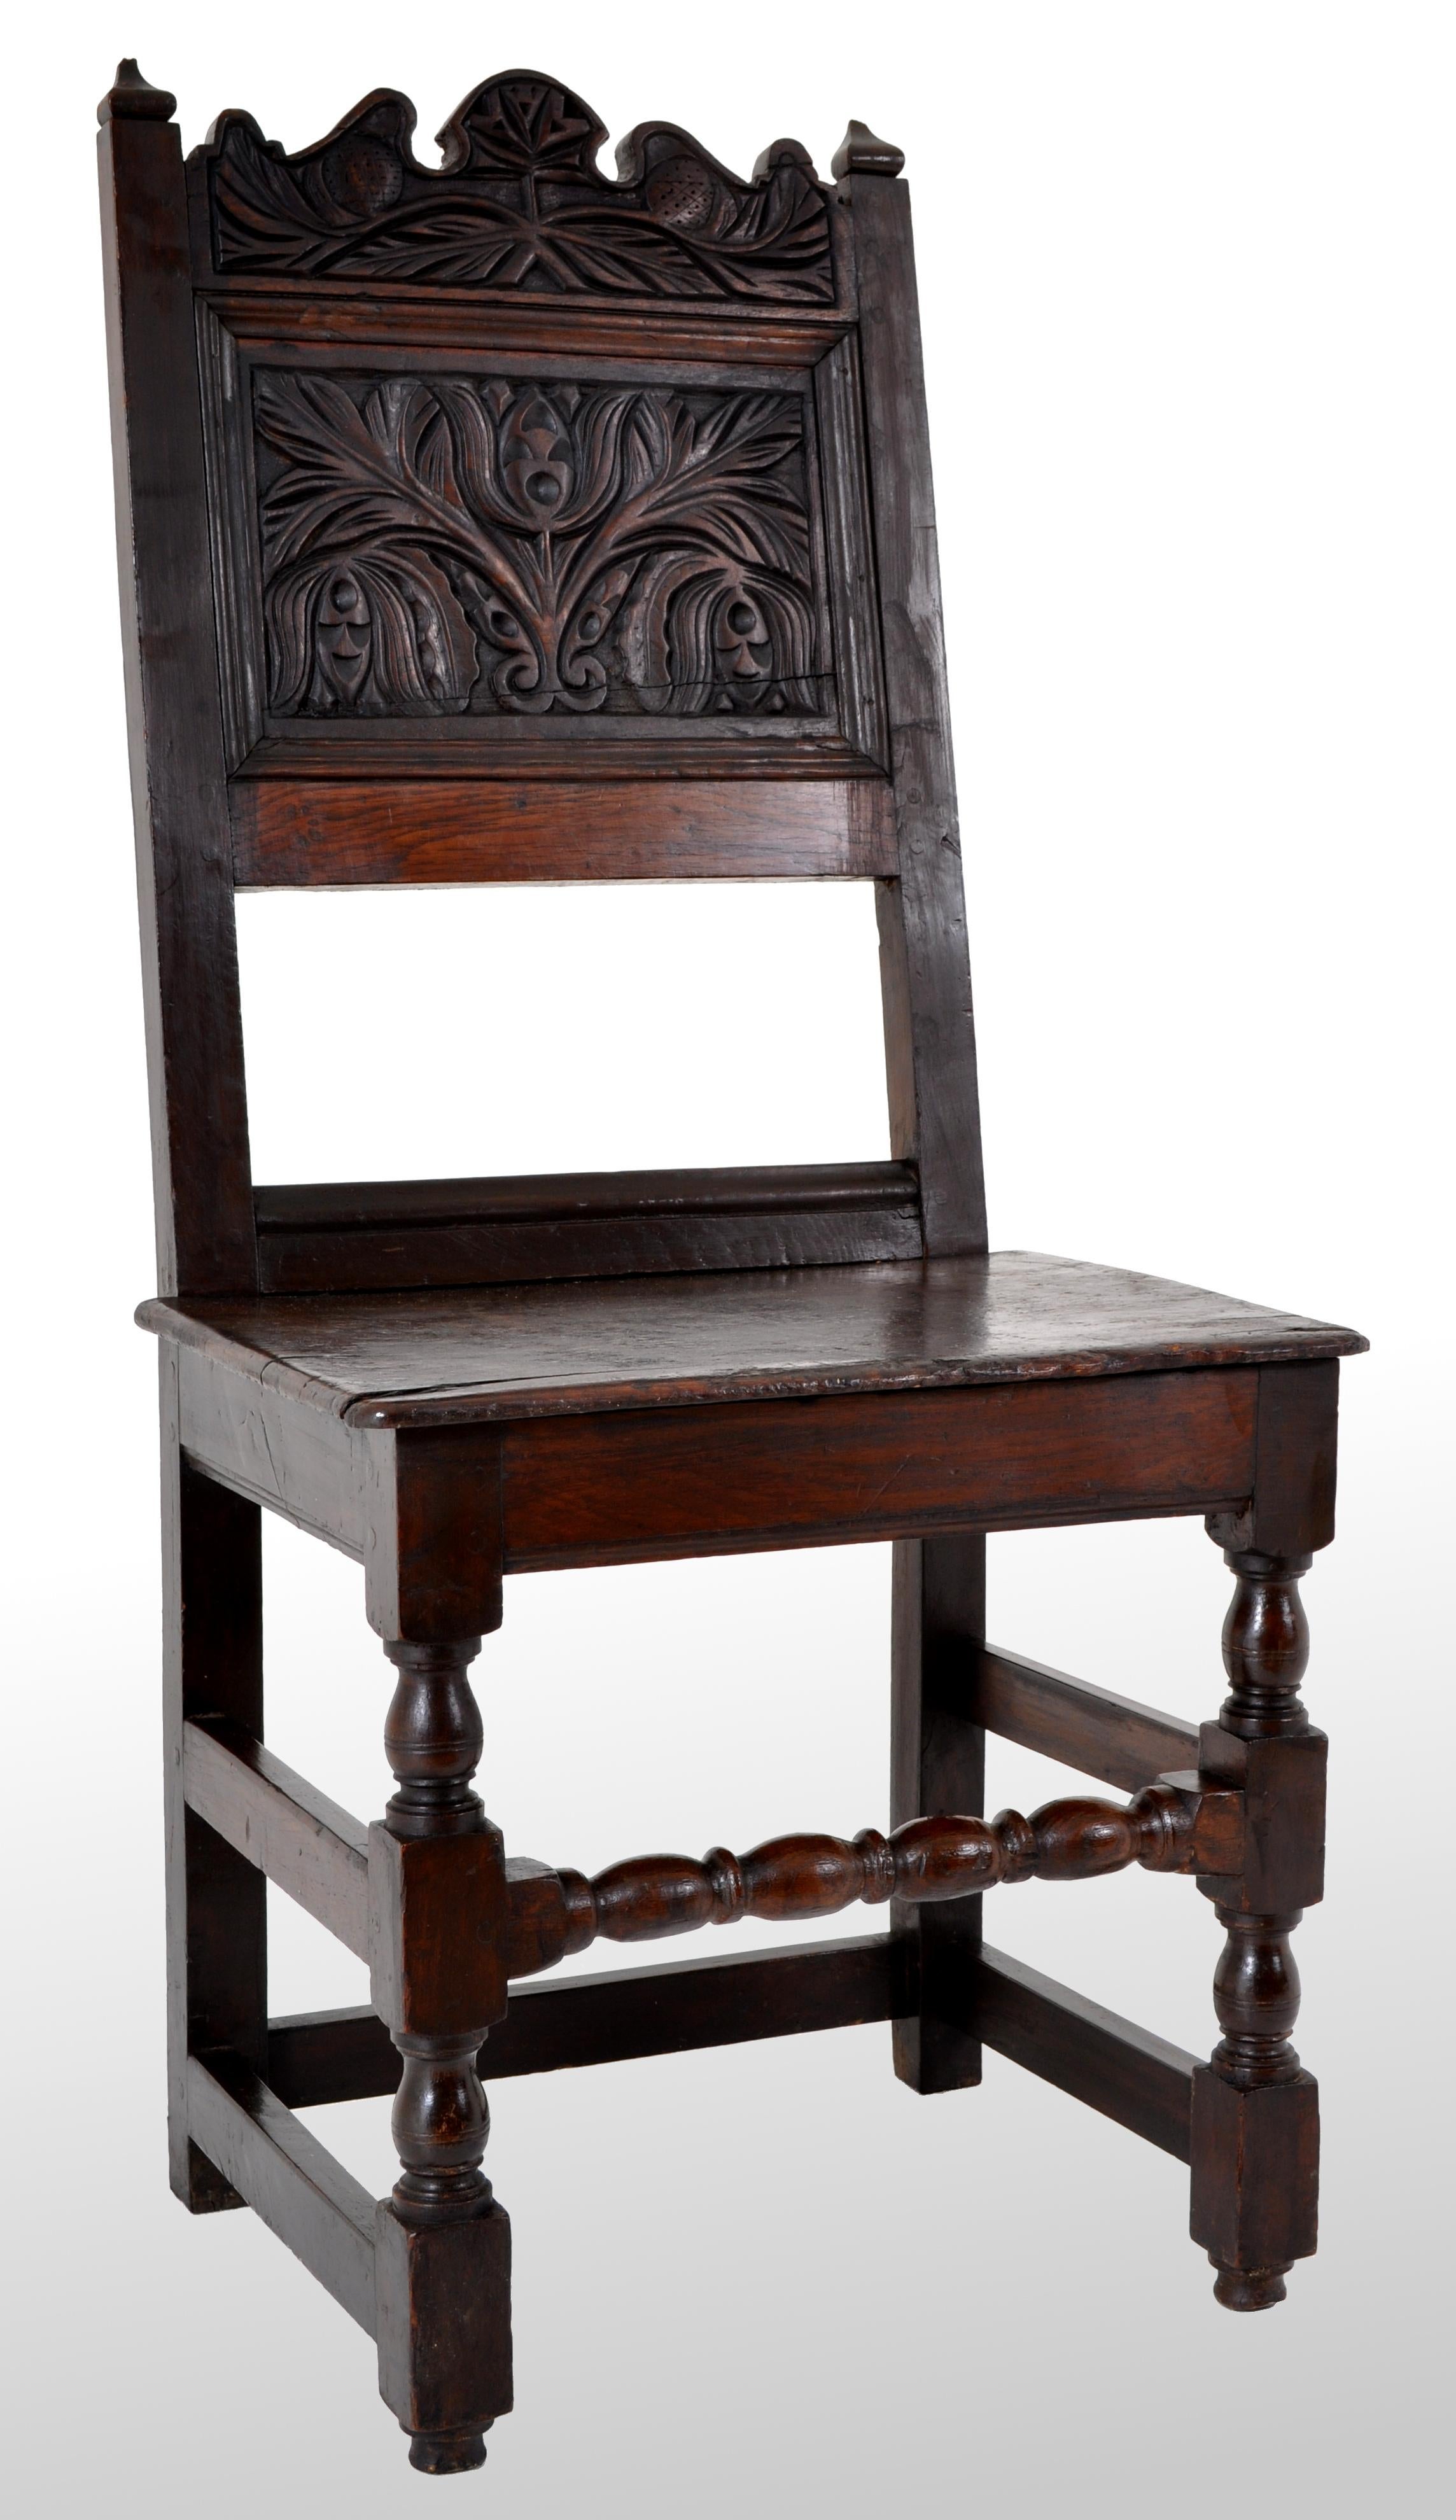 A Jacobean period carved oak chair, circa 1640. The chair having twin finials with a carved panel below with a stylized floral design. The chair having turned legs and a 'bobbin' turned stretcher, the chair of joined and pegged construction.